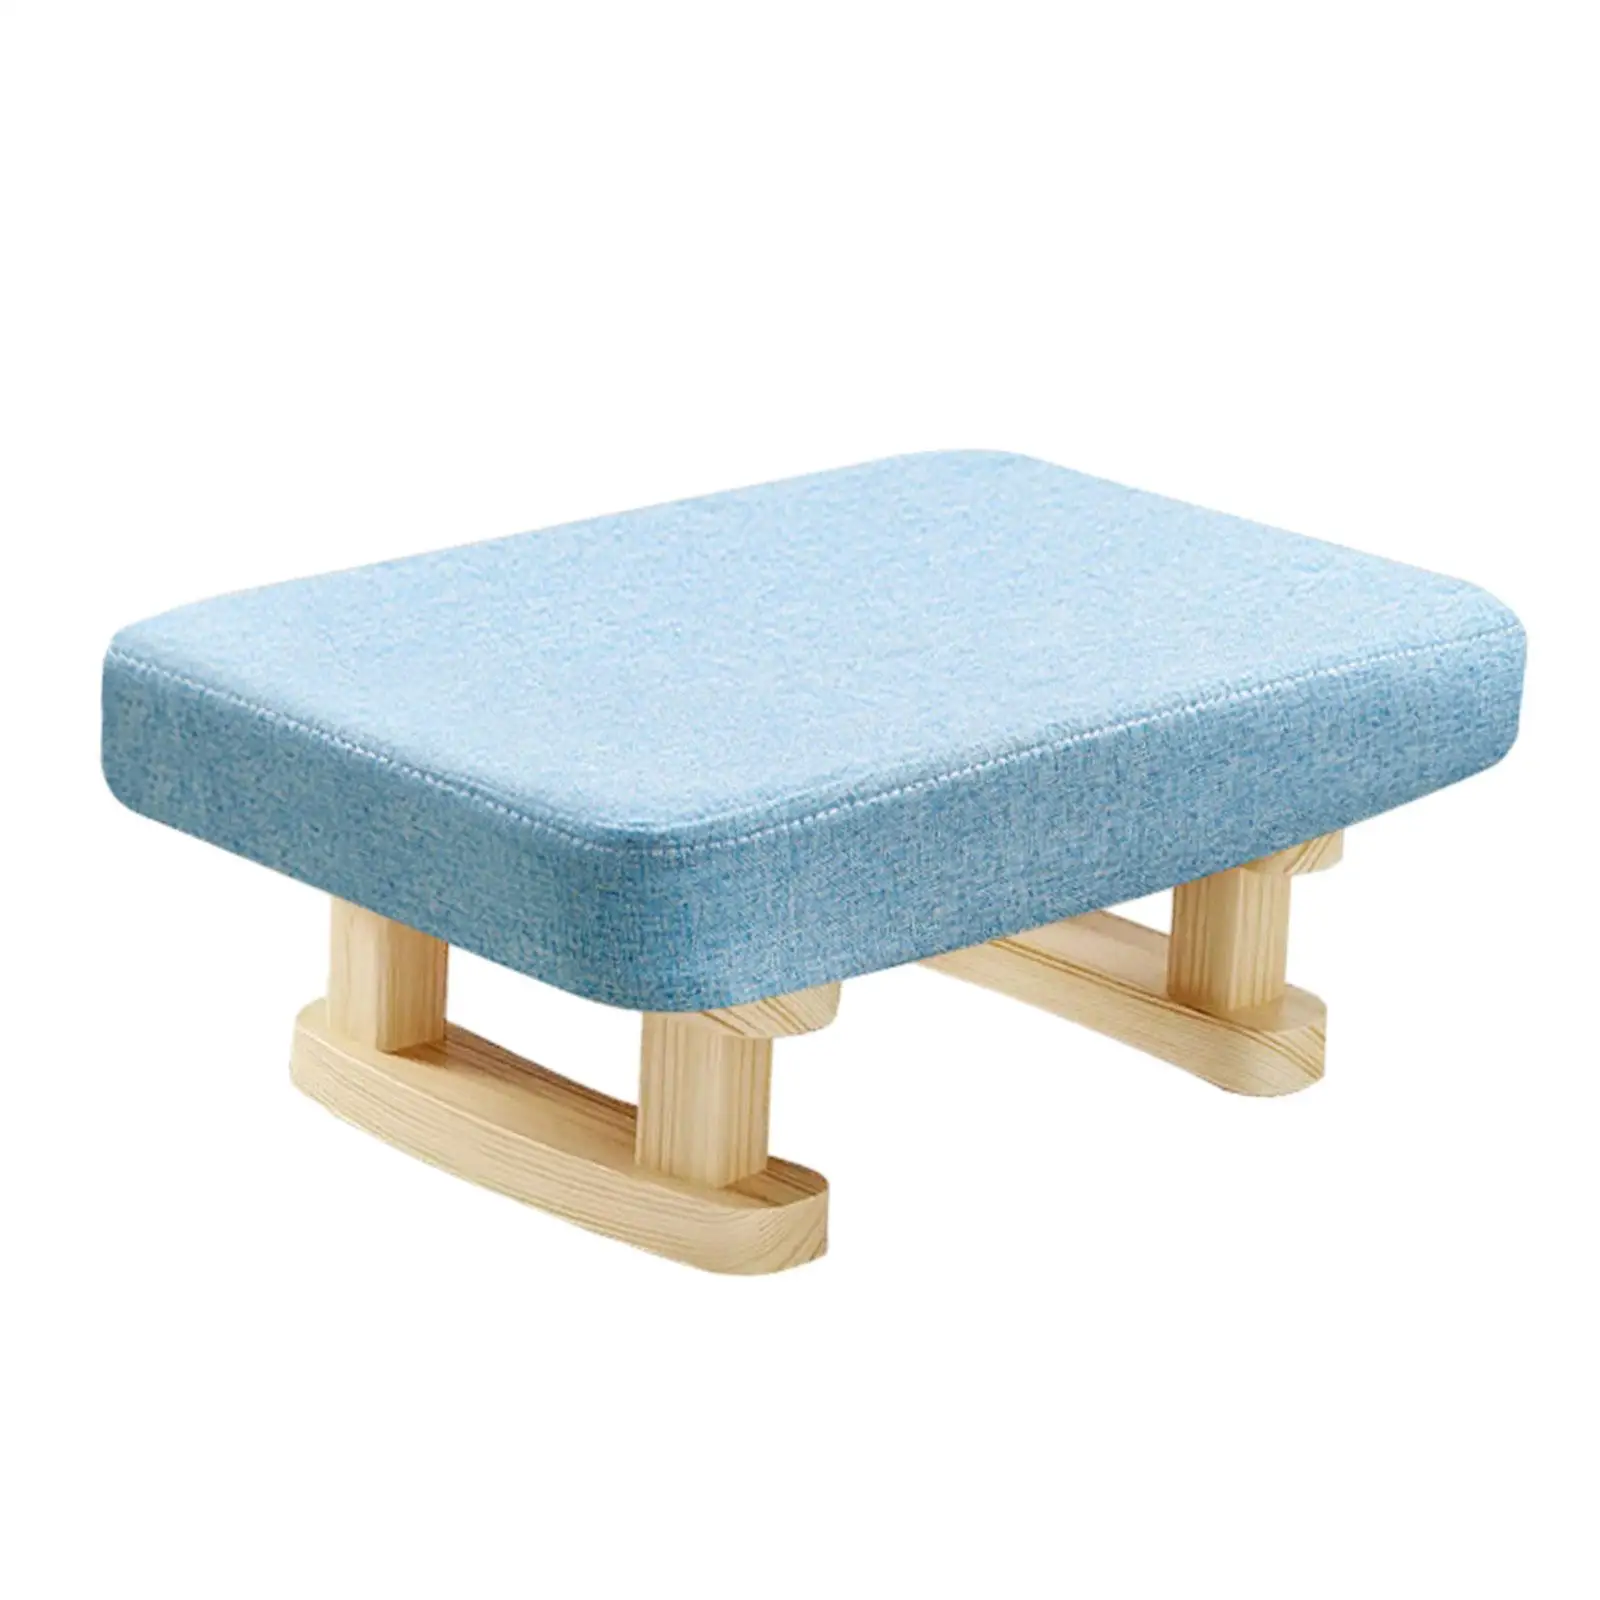 Small Footstool Bench Comfortable Rectangle Step Stool Footrest with Wooden Legs for Tearoom Living Room Bedroom Desk Entryway